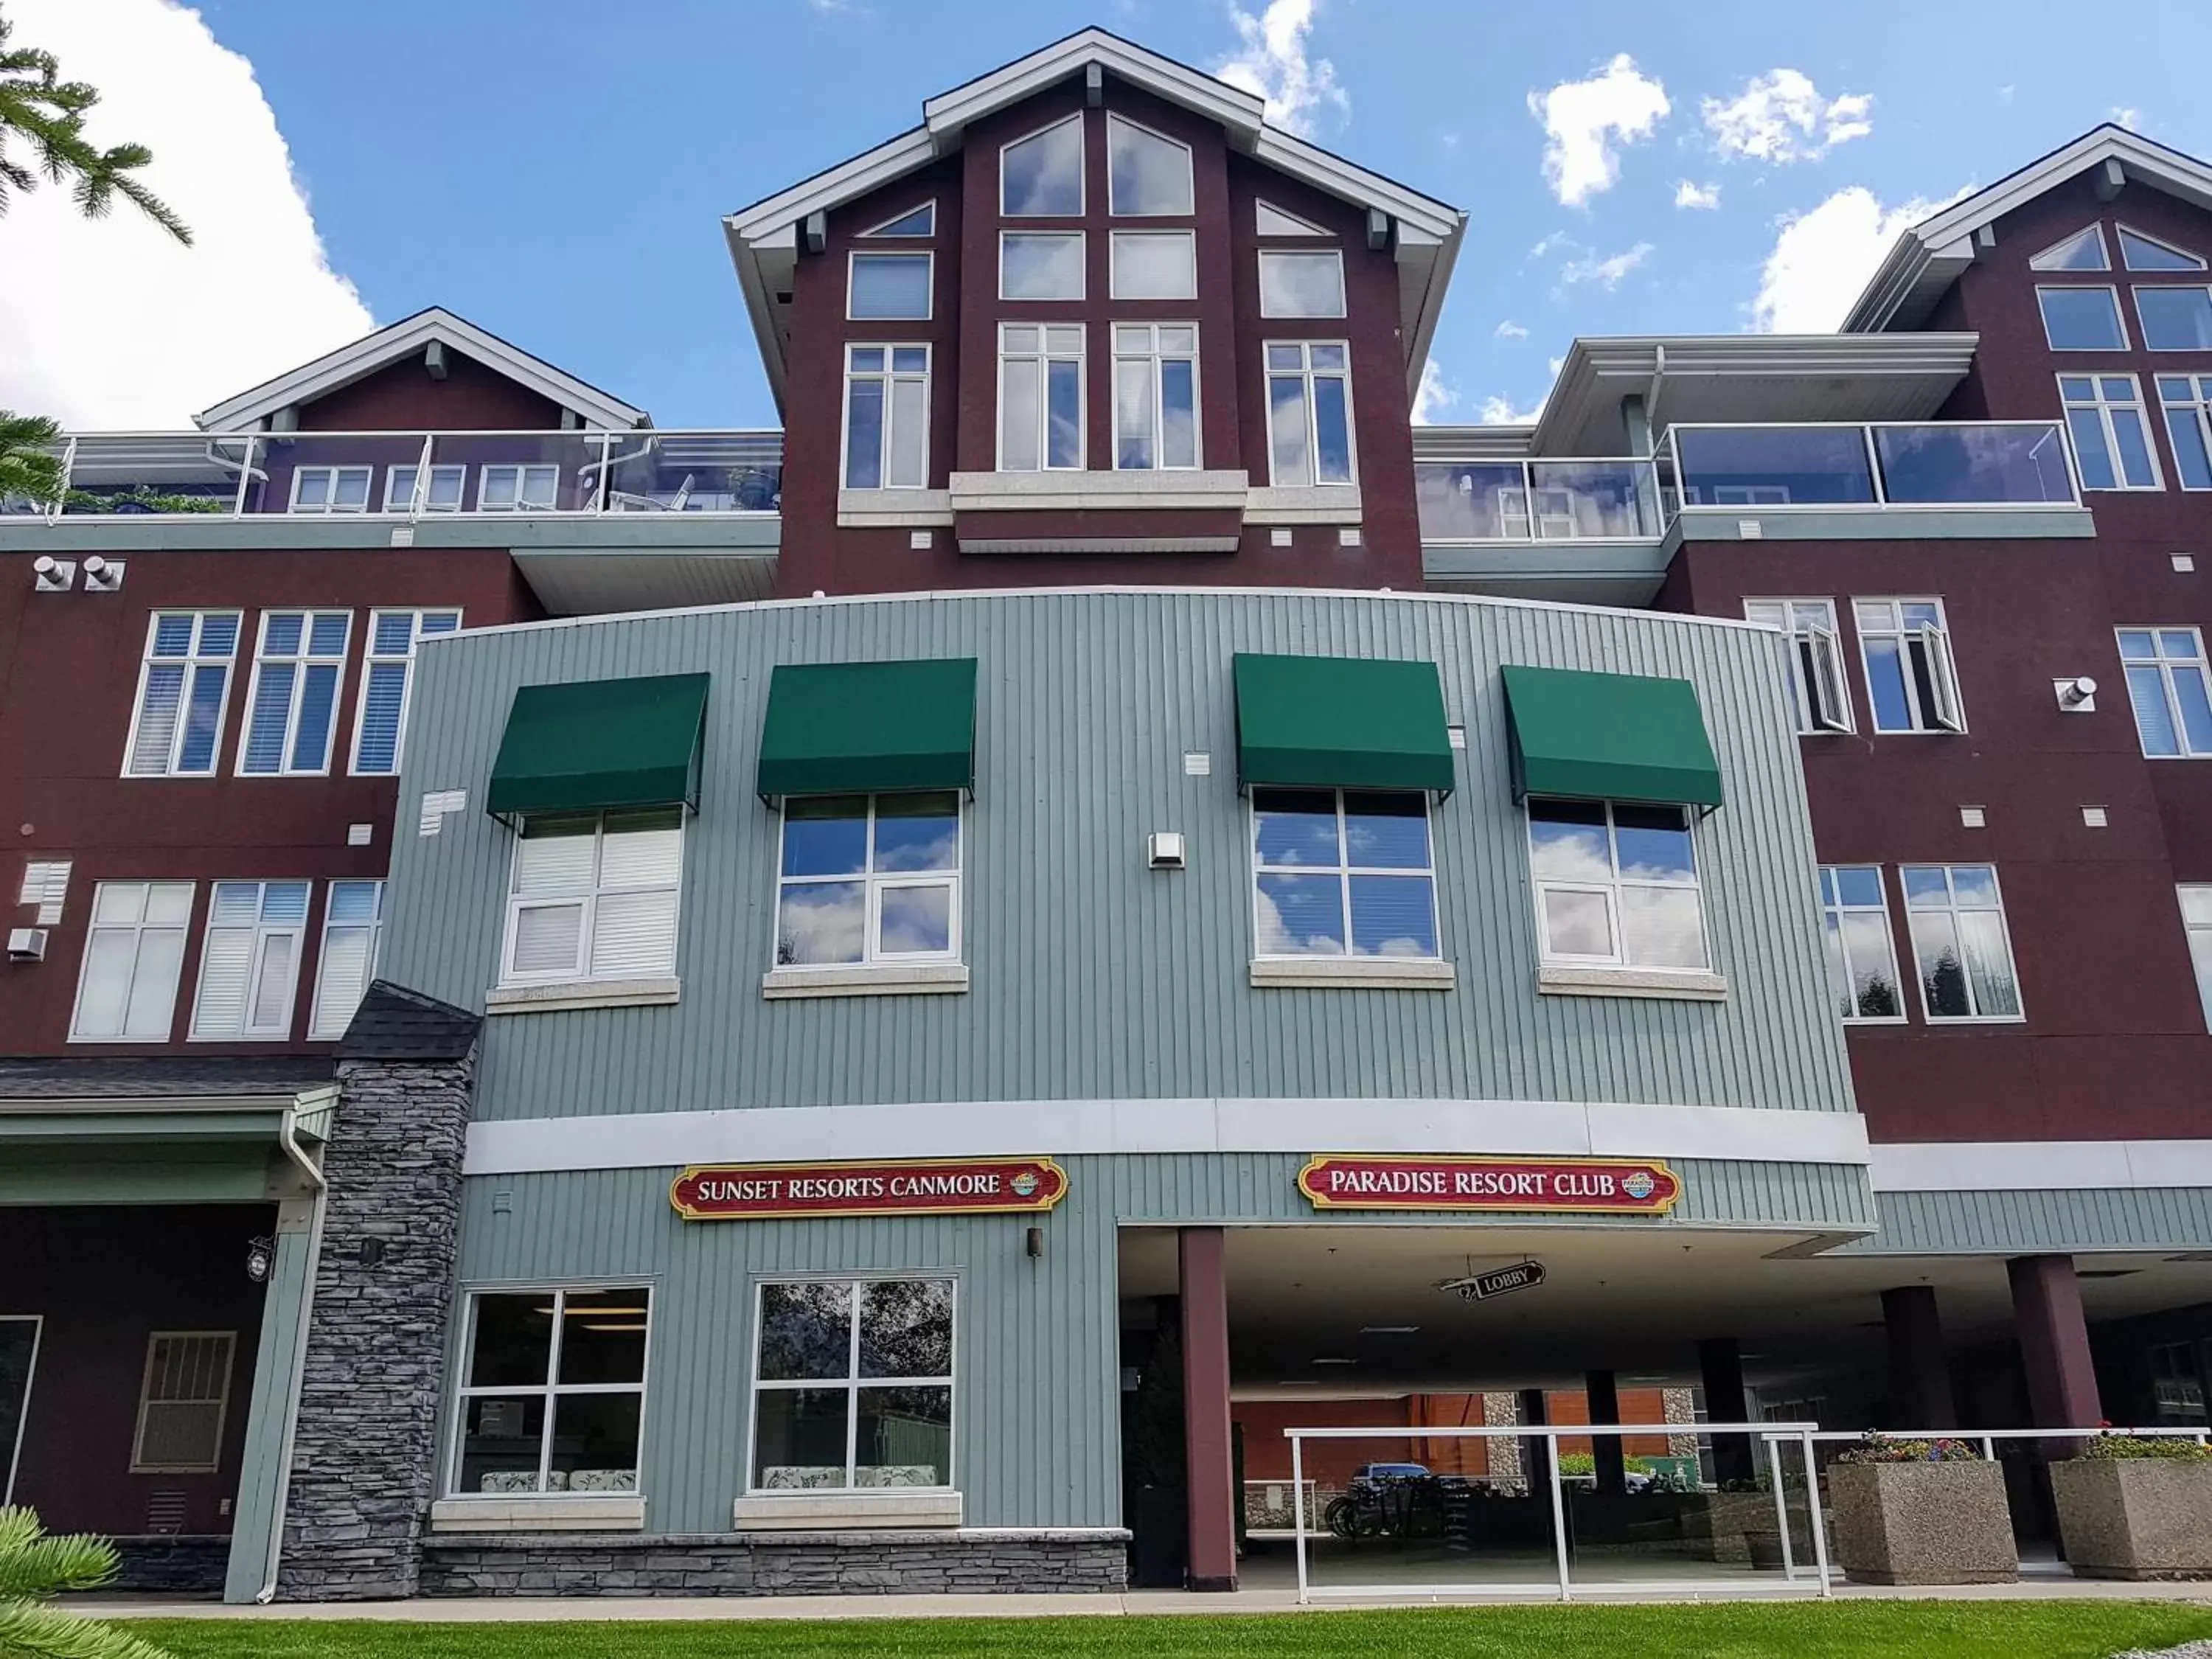 Property Building in Sunset Resorts Canmore and Spa